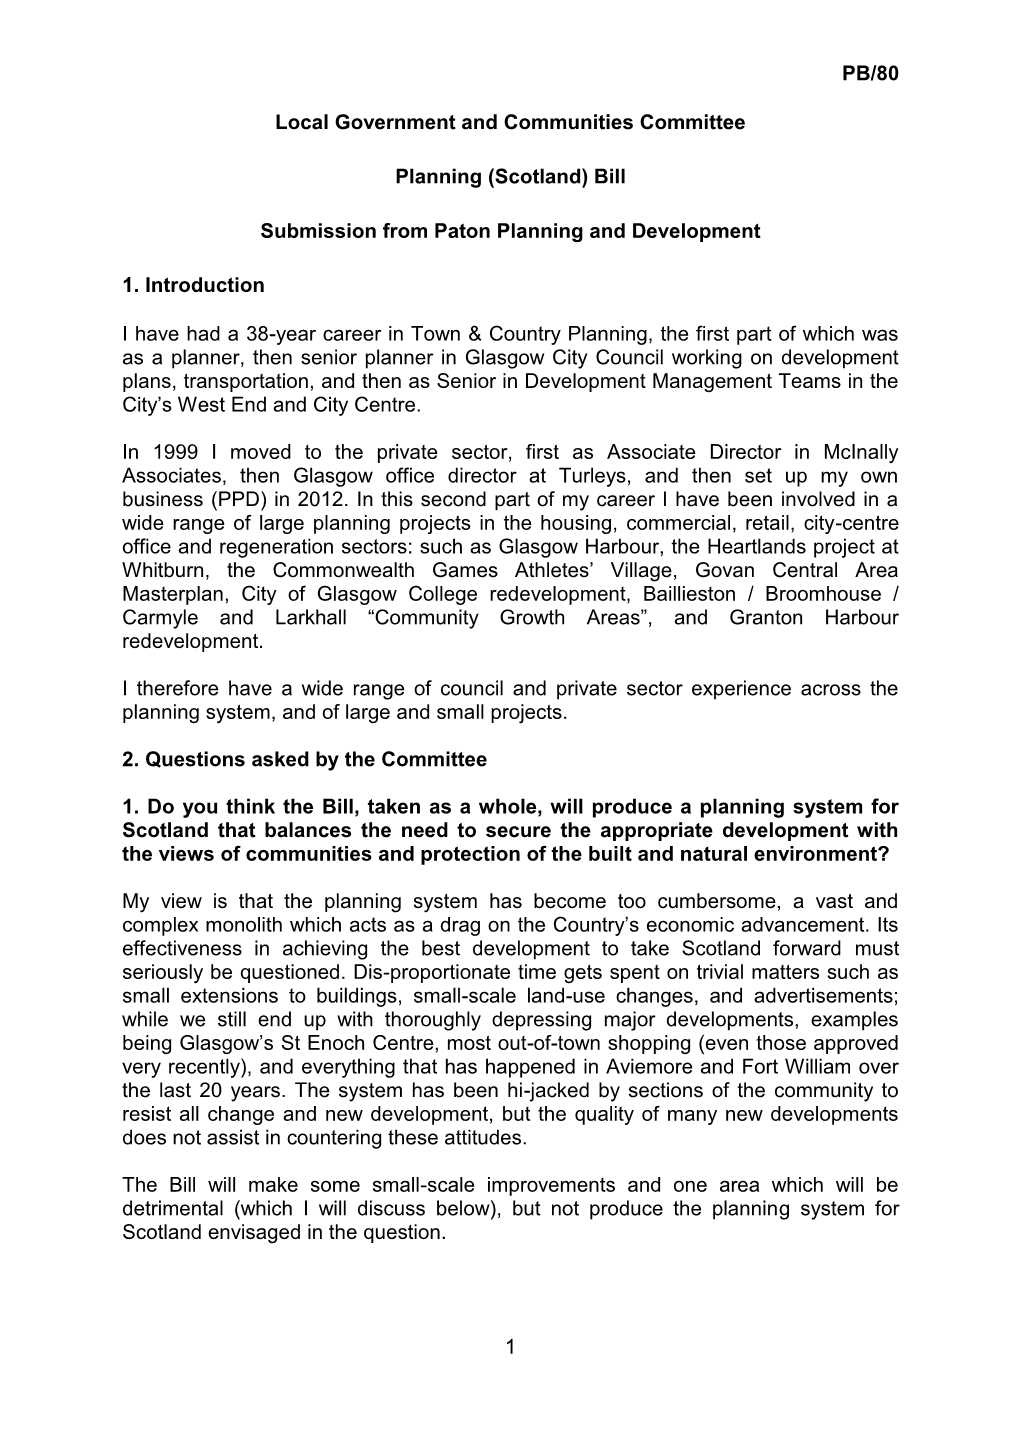 Submission from Paton Planning and Development (168KB Pdf)